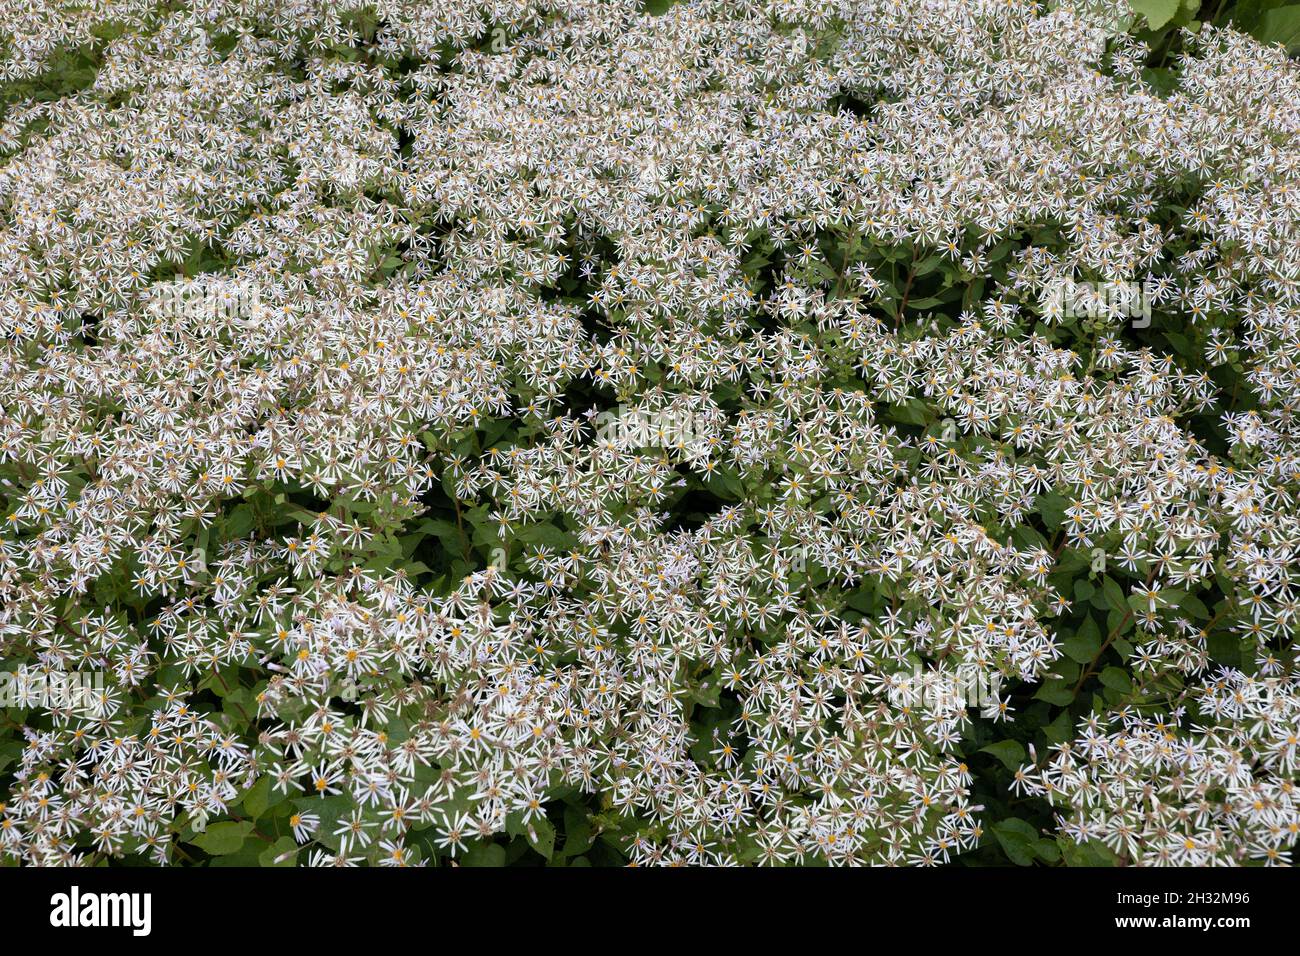 White wood aster Eurybia divaricata (Aster divaricatus) flowers, herbaceous perennial plant in the family: Asteraceae, native range: Eastern North Ame Stock Photo